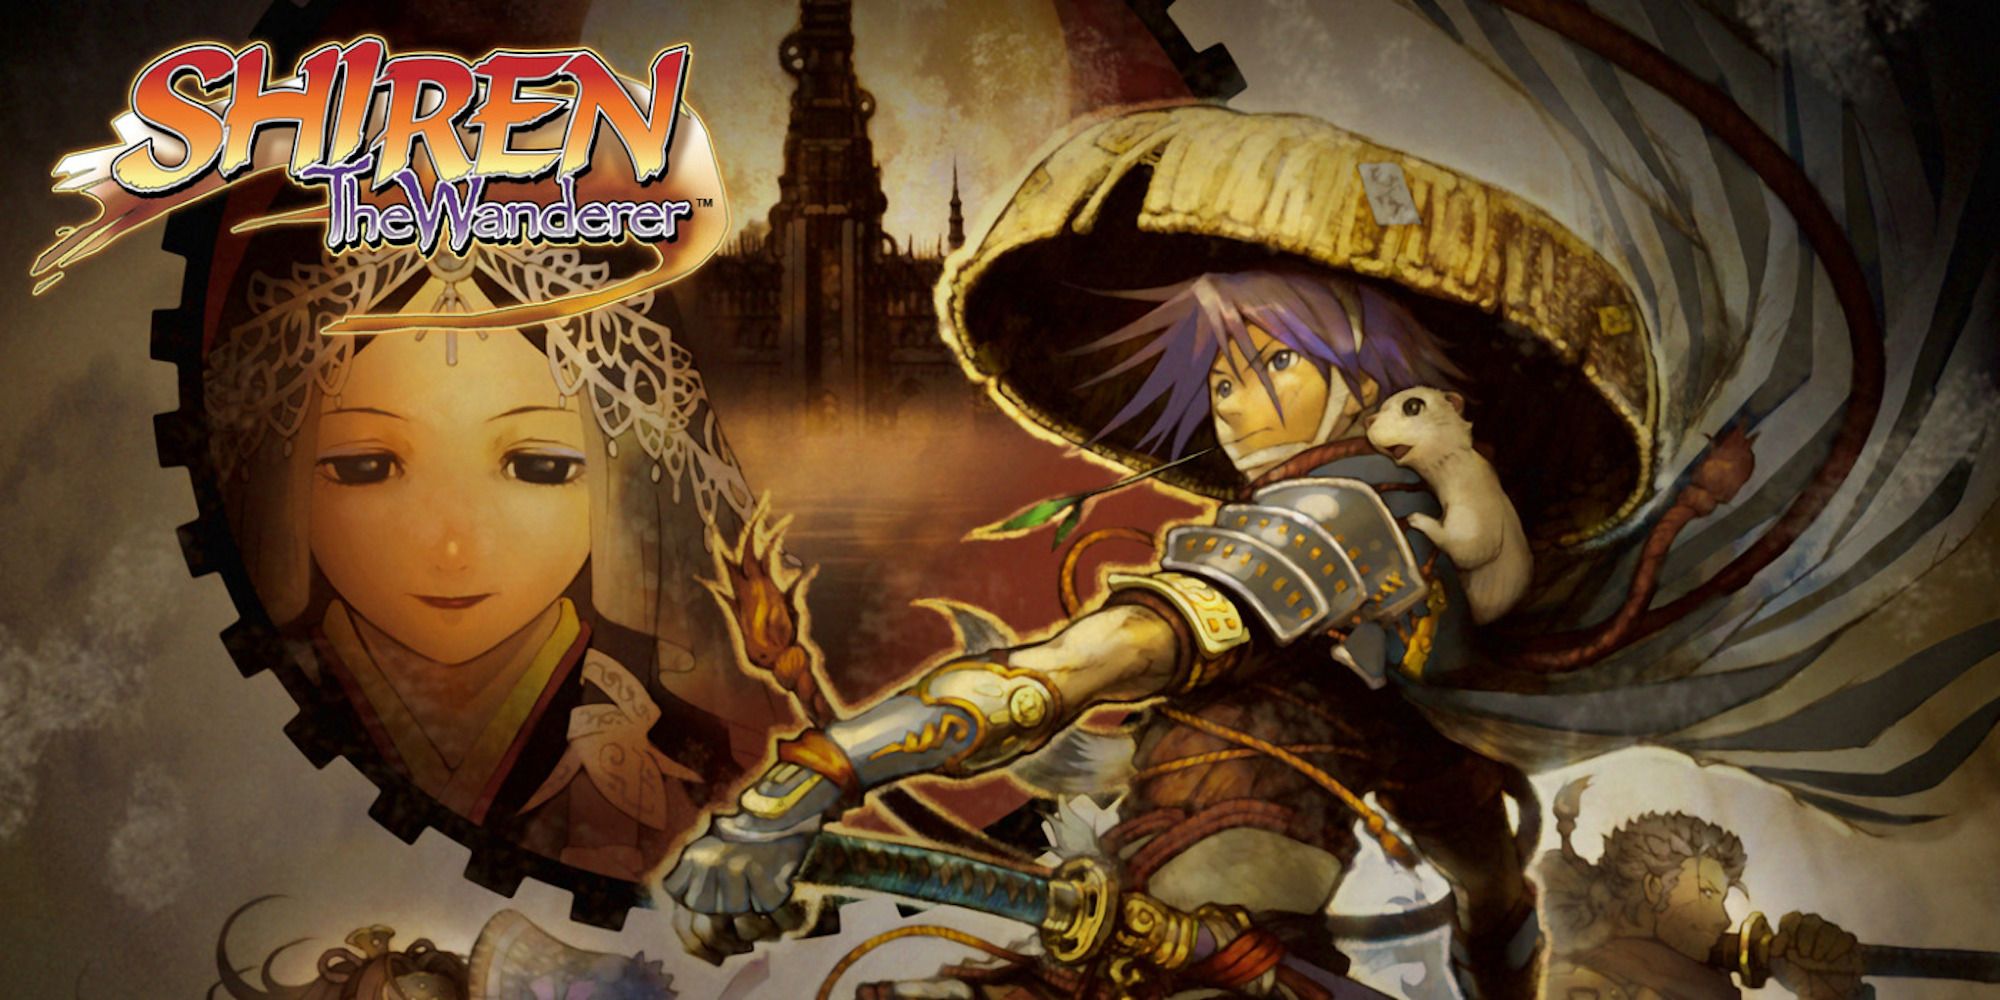 Promo art featuring characters from Shiren The Wanderer